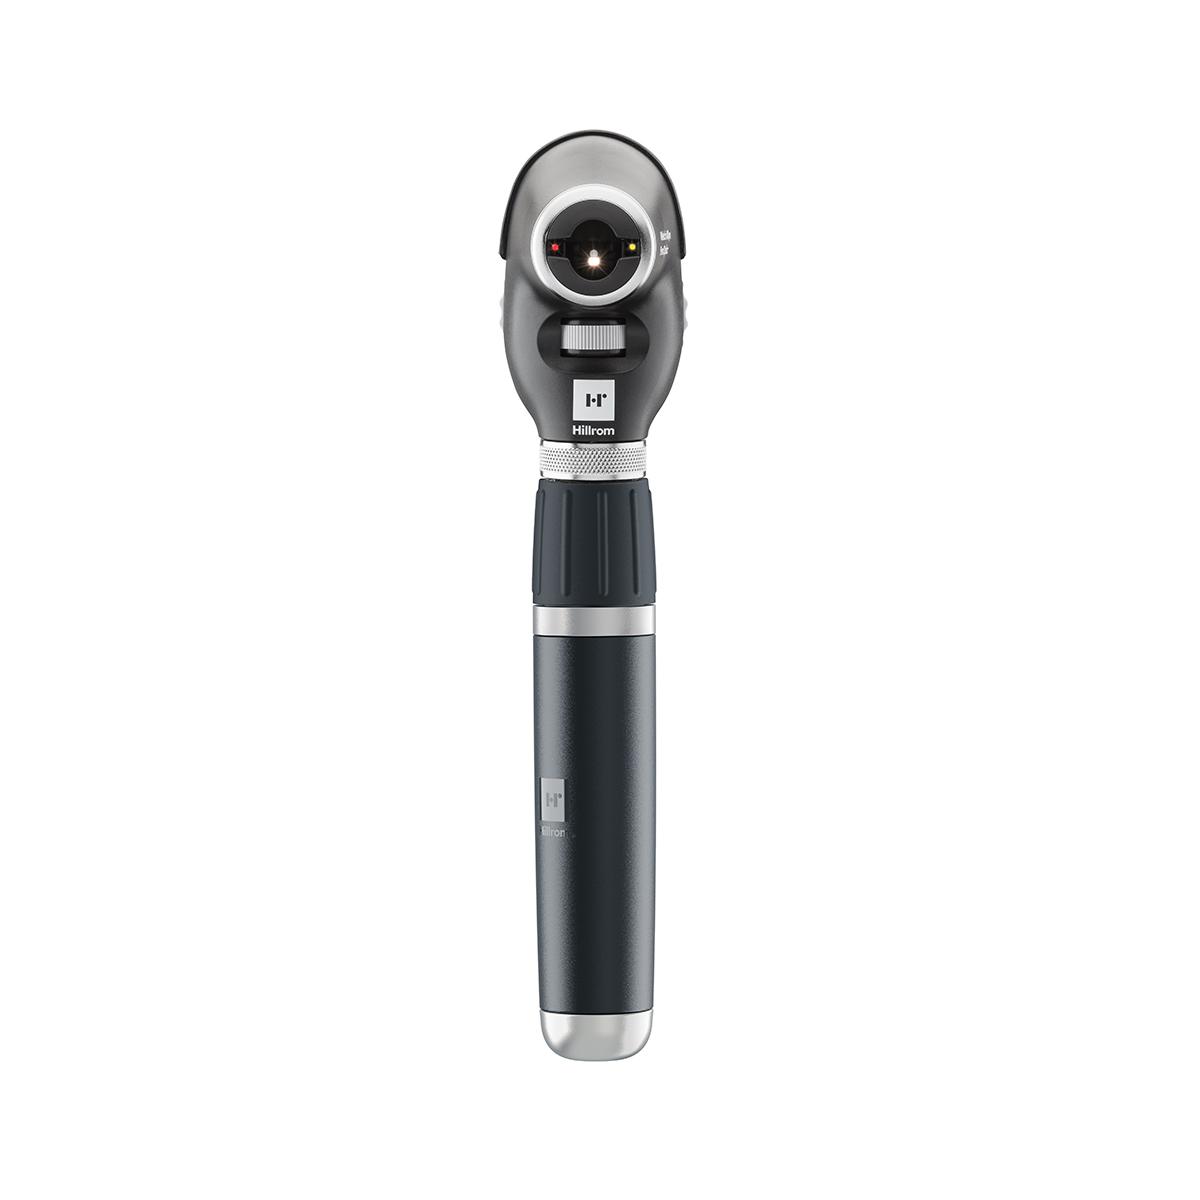 PanOptic Plus ophthalmoscope, front view Quick Eye alignment technology